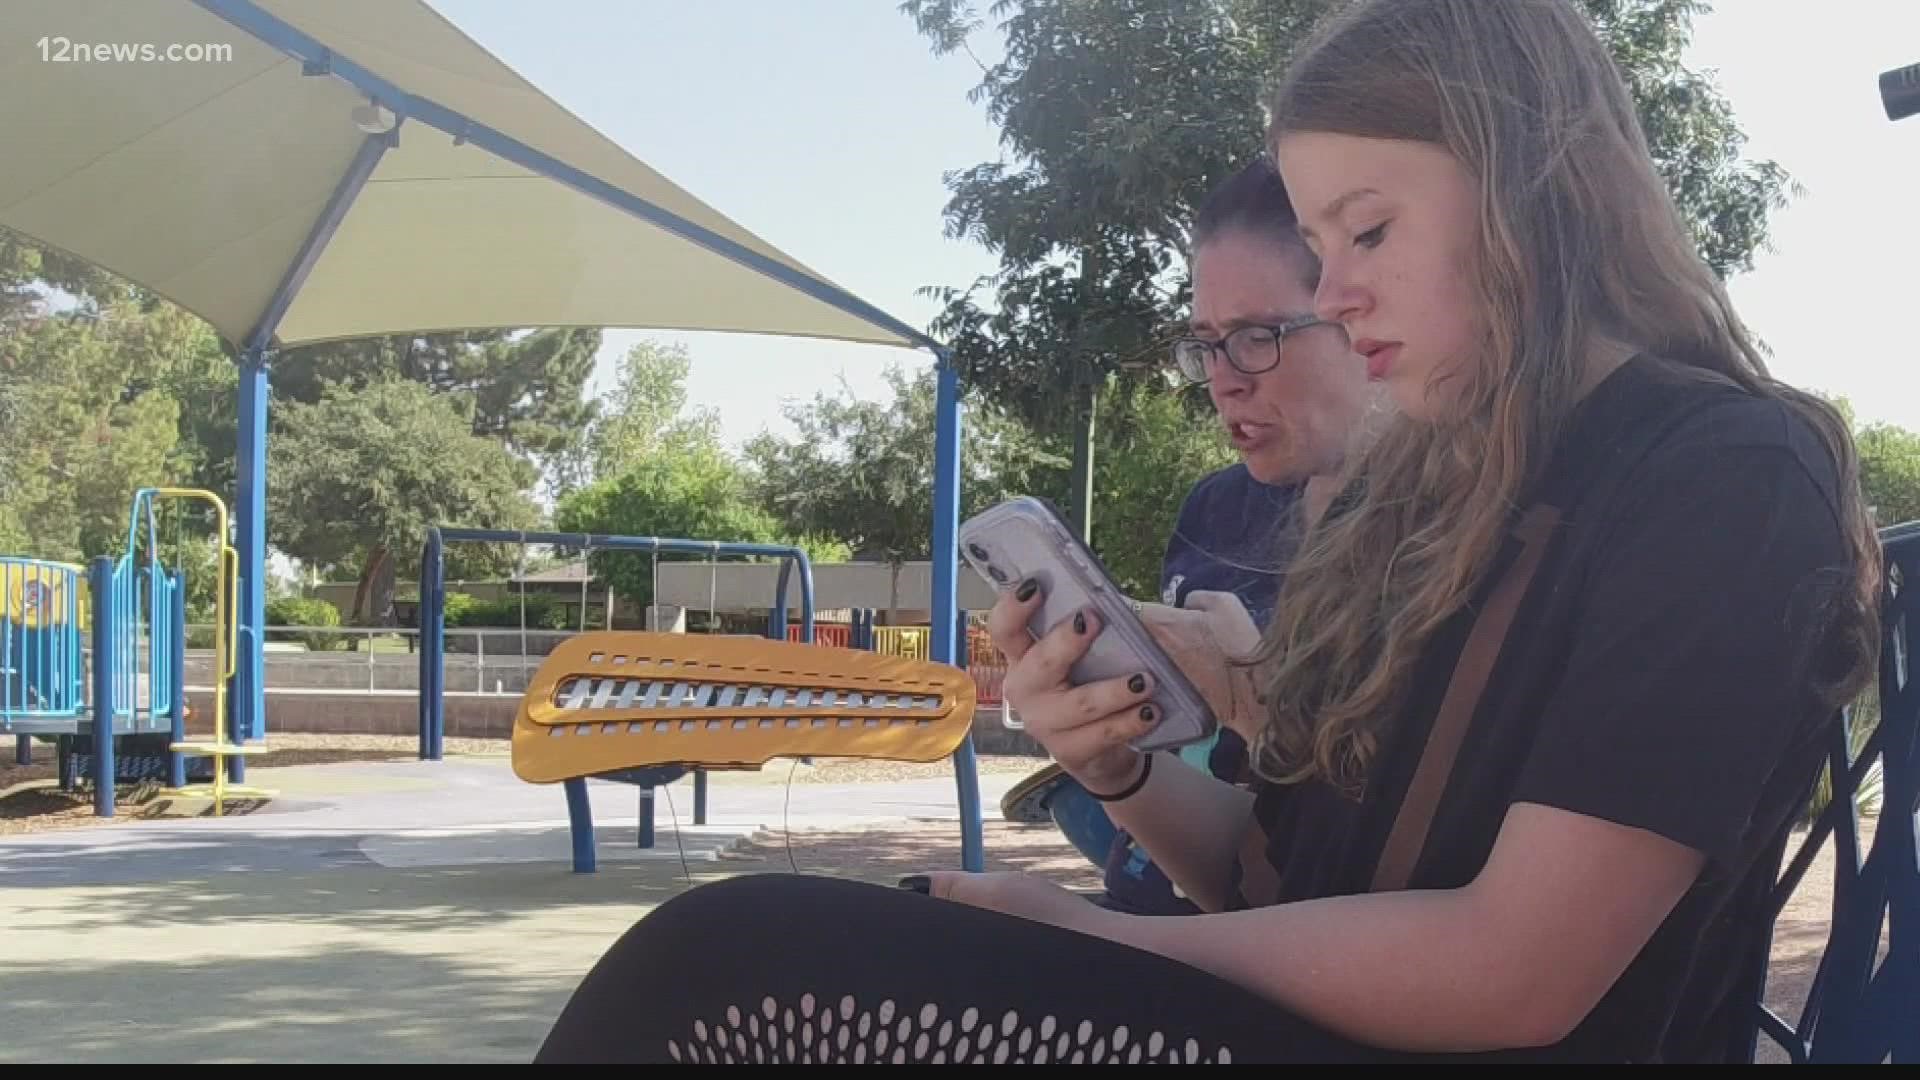 Valley school districts say they've had issues of students stealing things from campus and posting it on TikTok. It's also affecting students not participating.